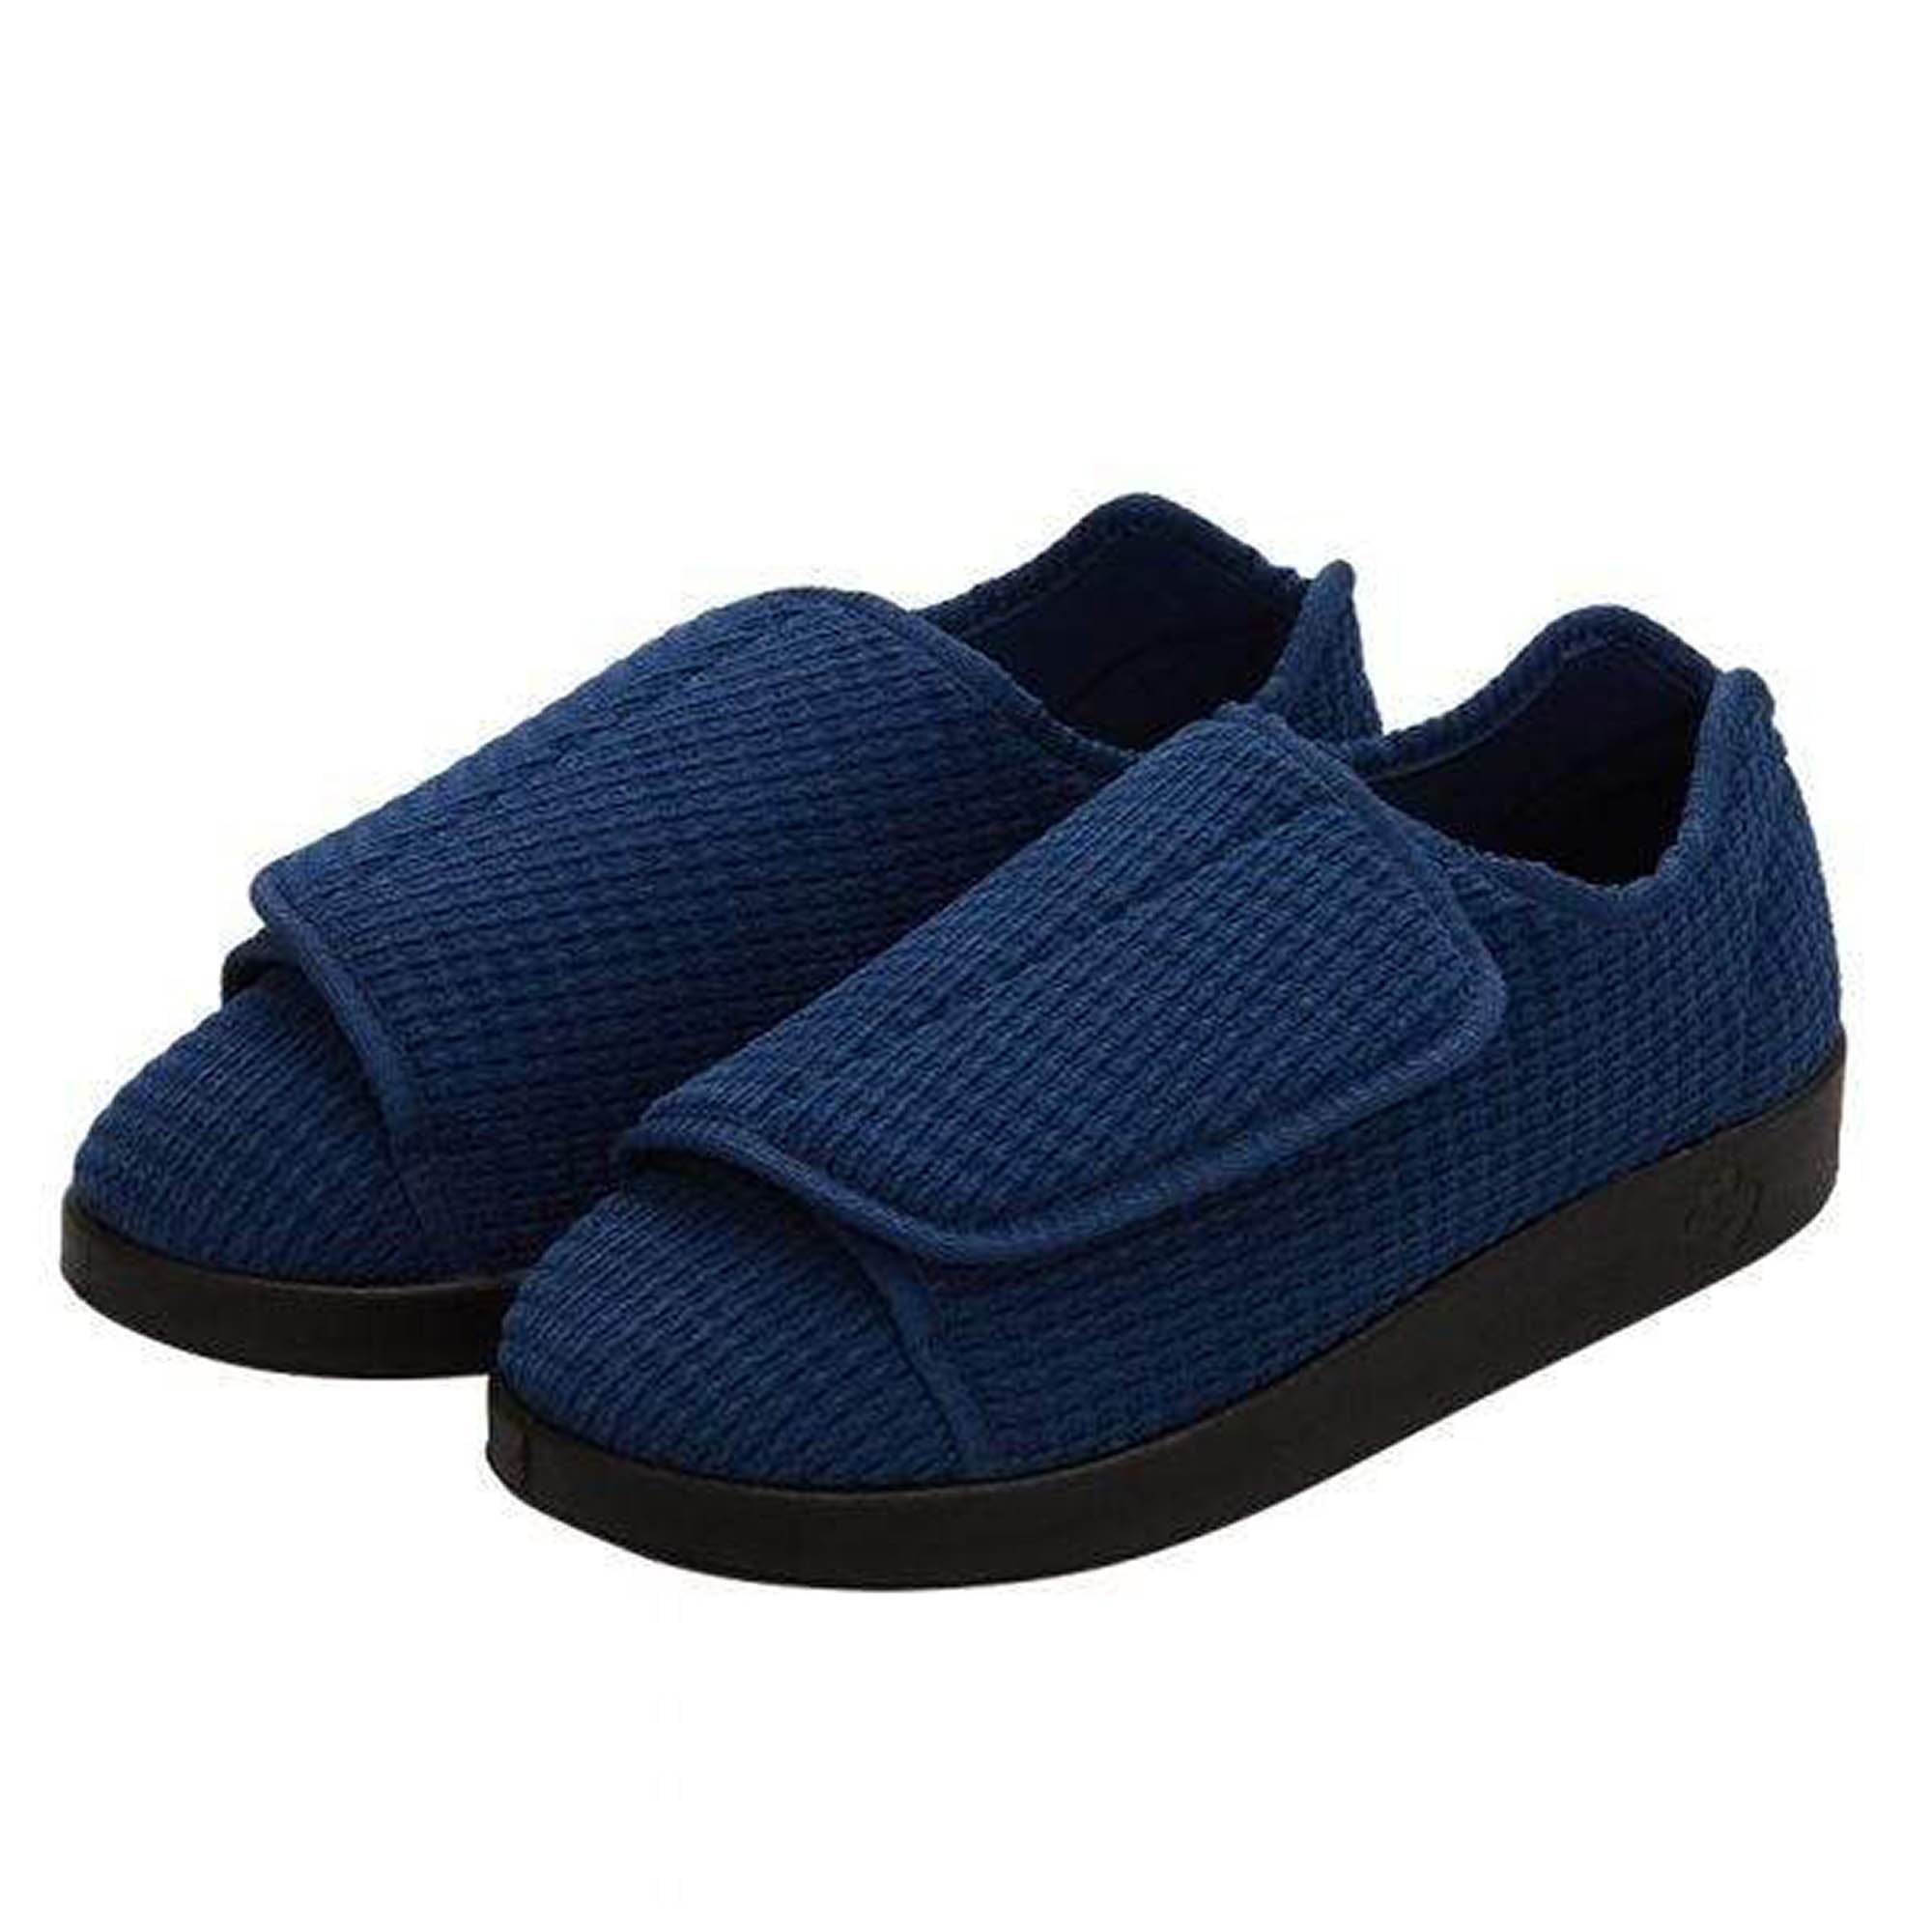 Silverts Men's Extra Extra Wide Slip-Resistant Slippers - Navy - 8